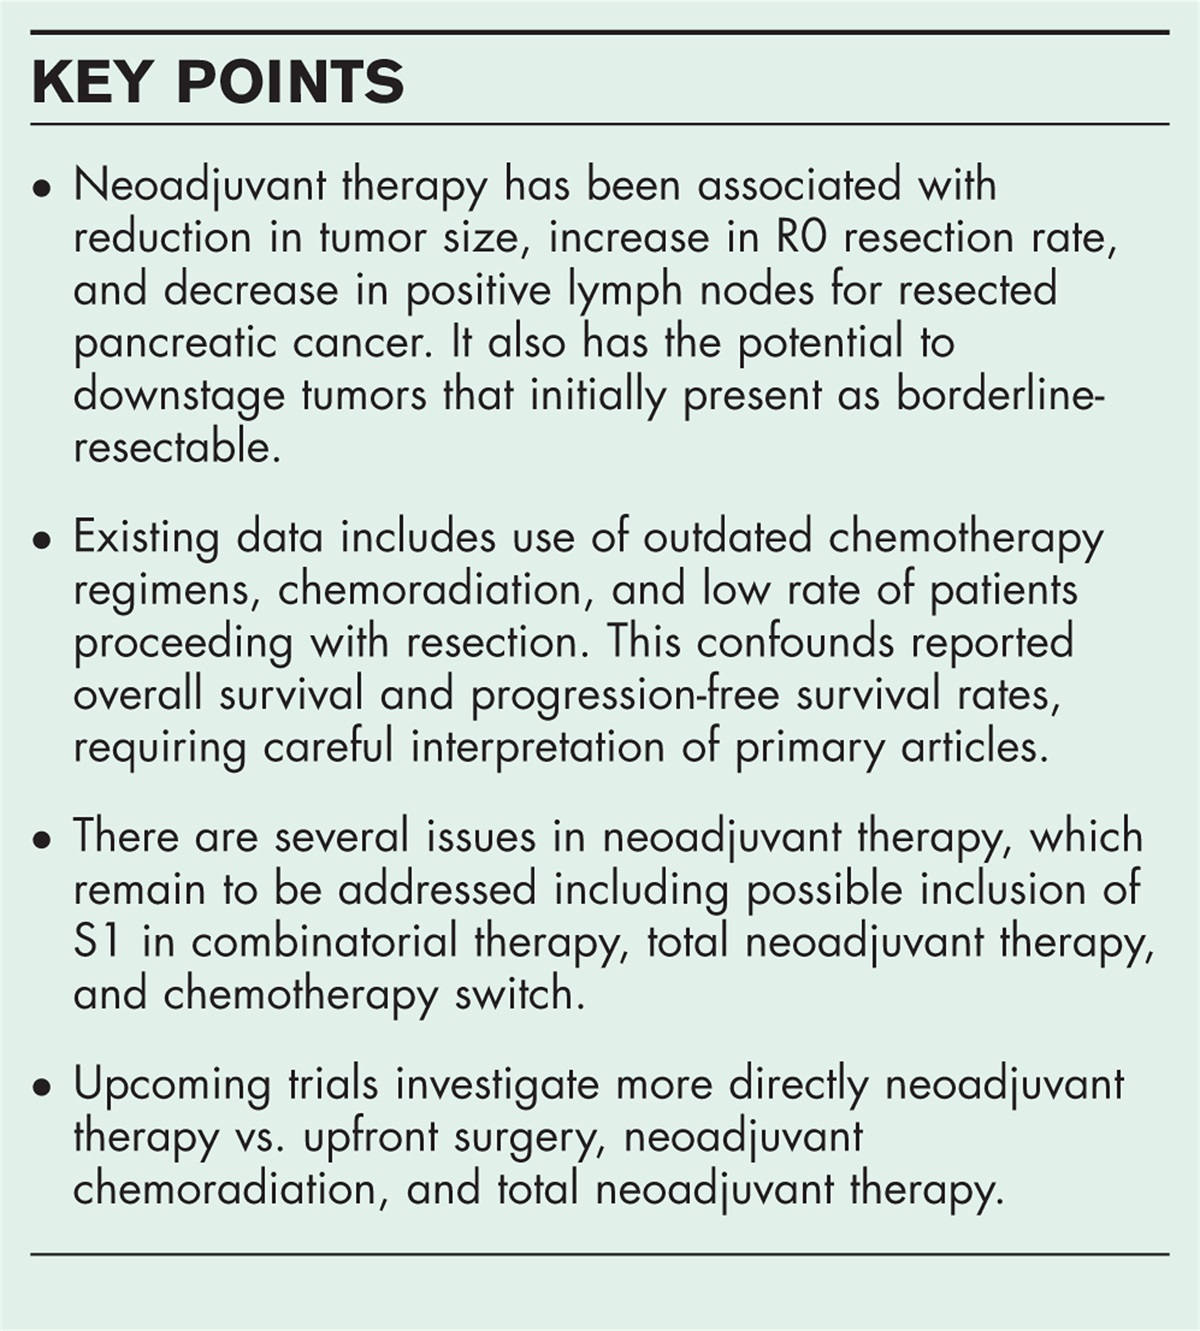 Neoadjuvant therapy in pancreatic cancer: a review and update on recent trials